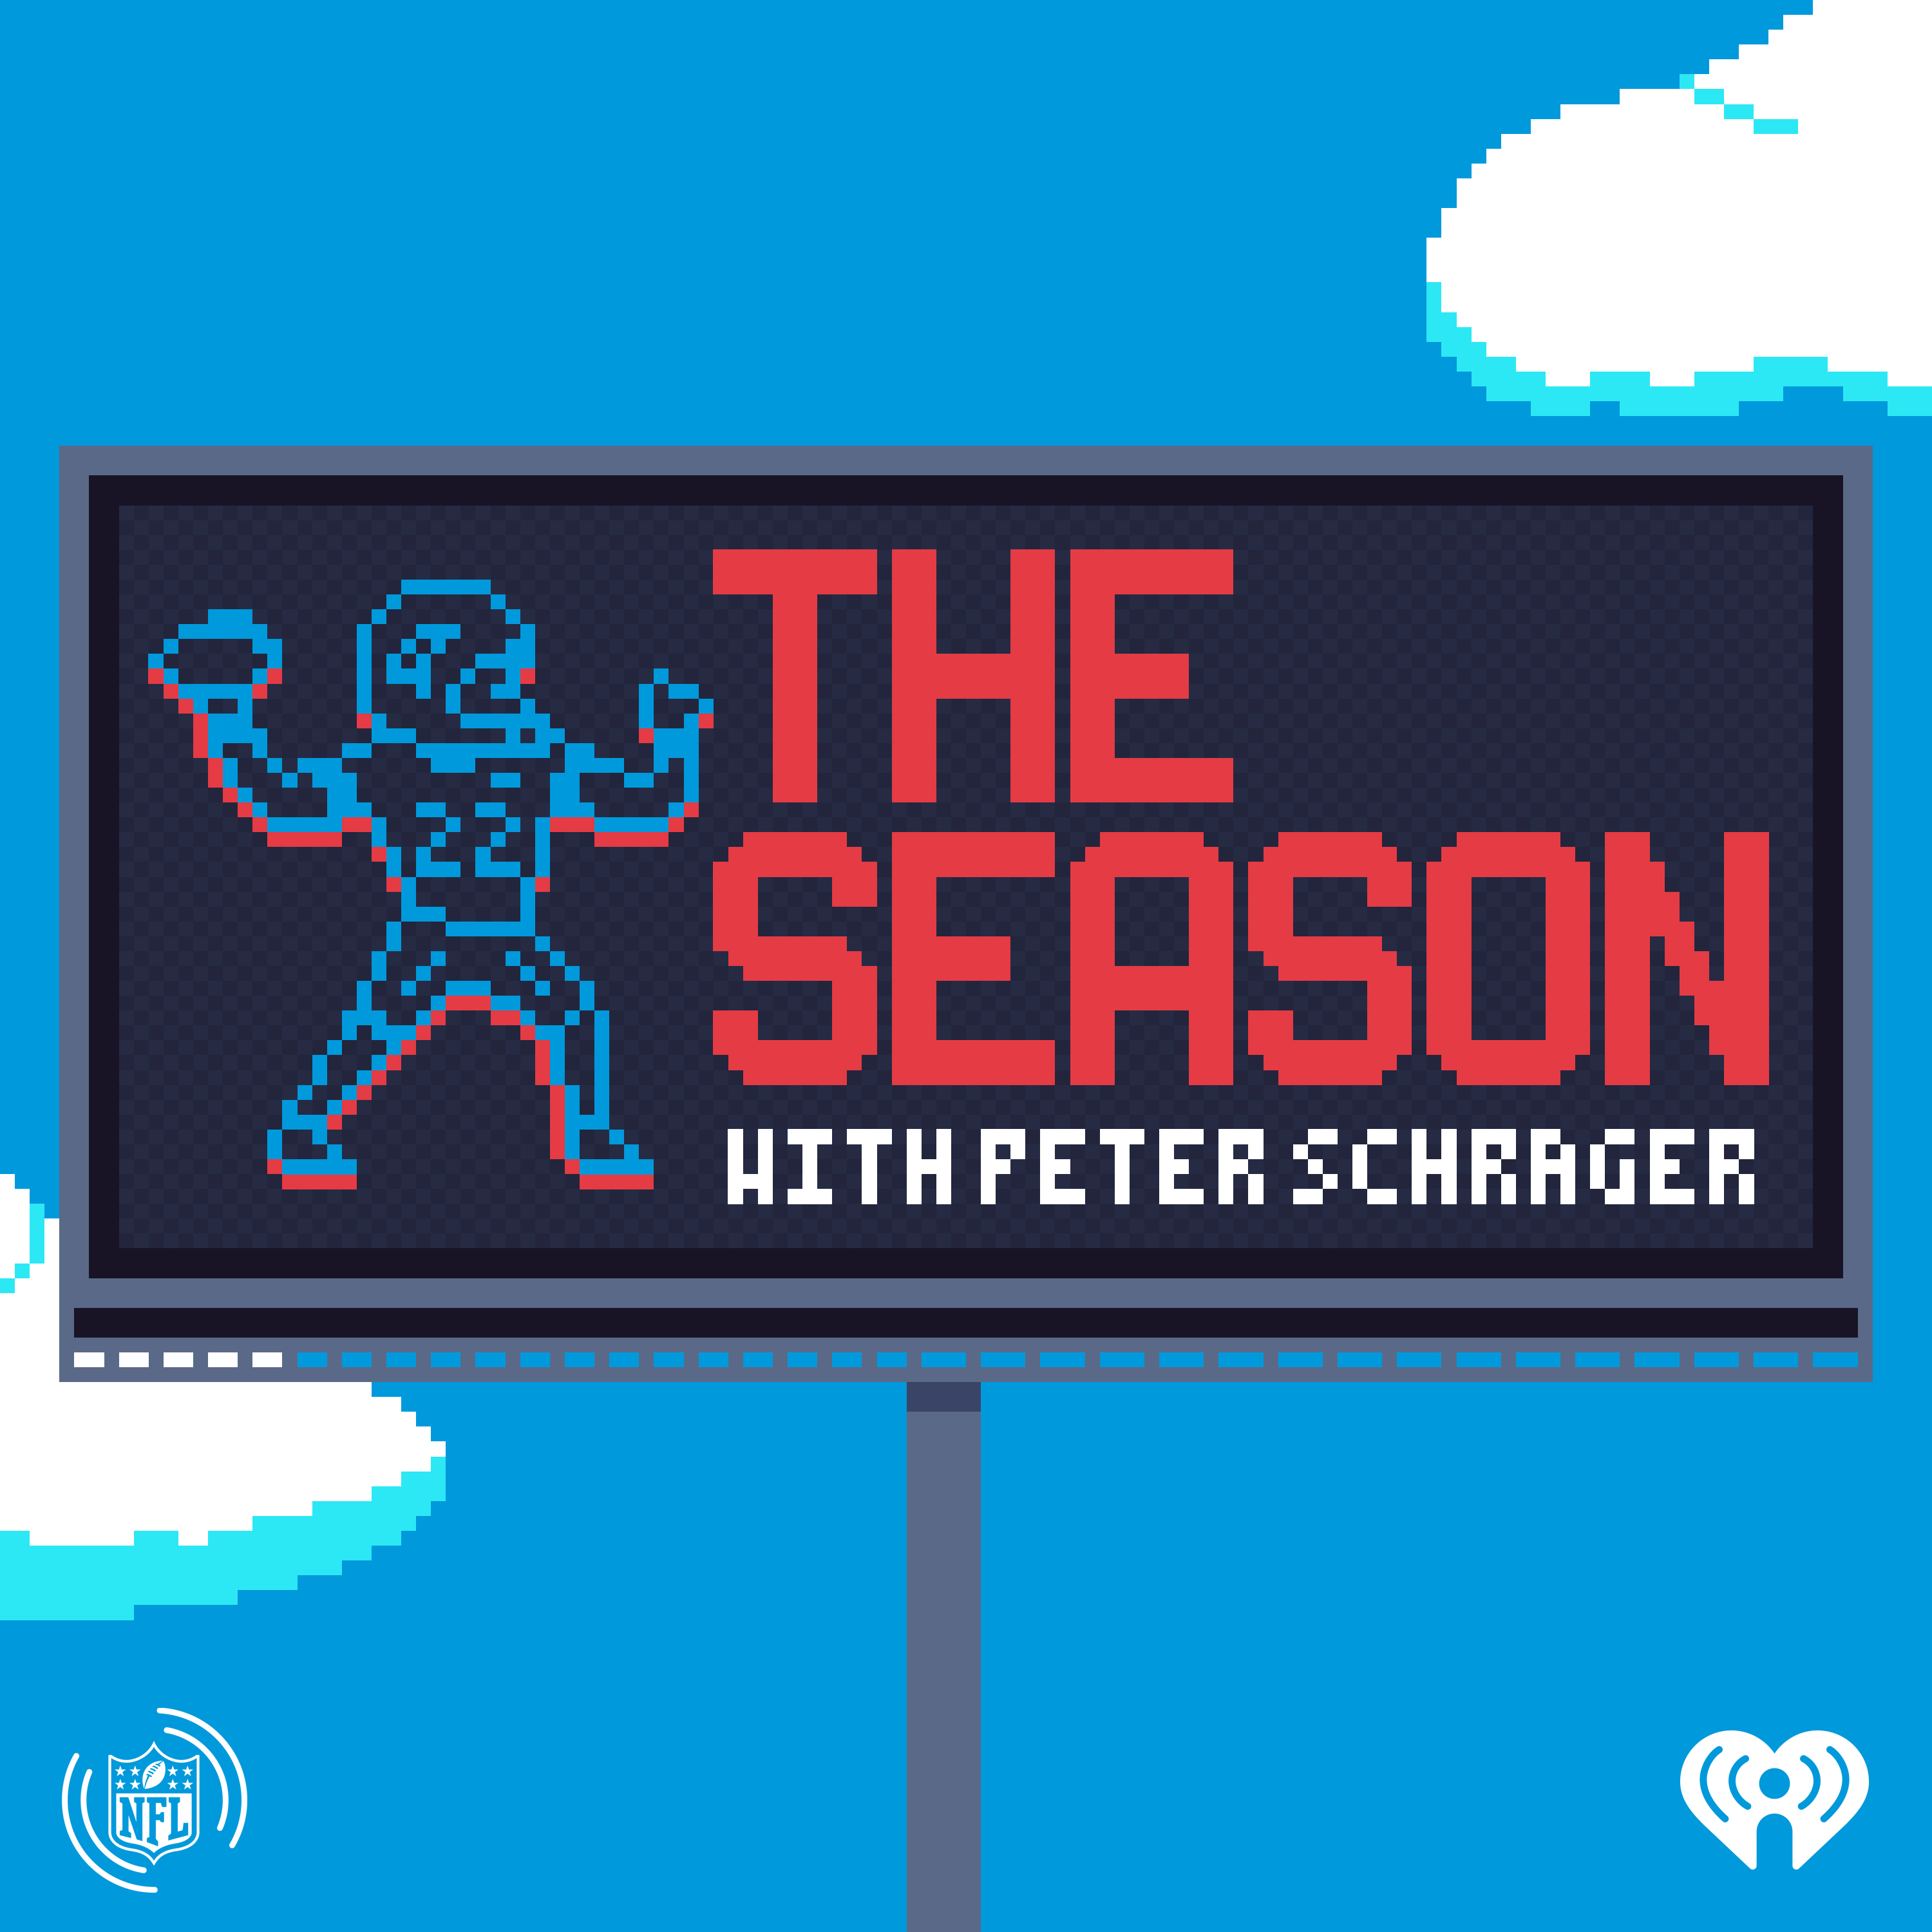 The Season with Peter Schrager: The Athletic's Ted Nguyen